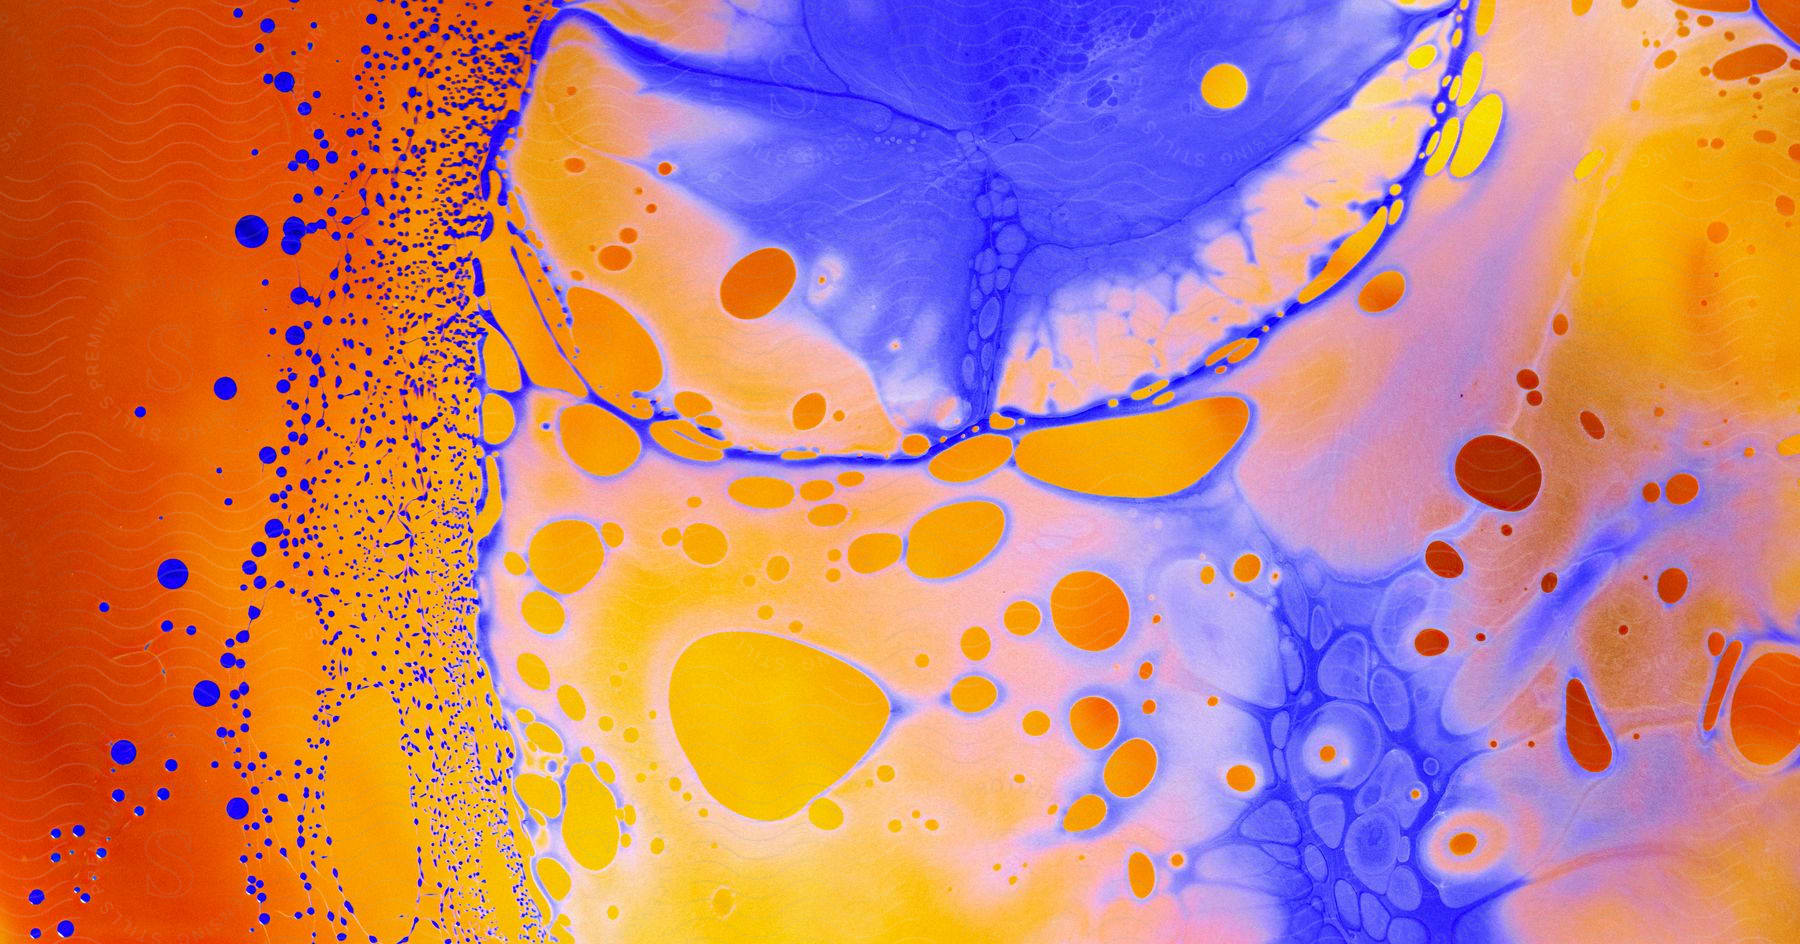 Abstract painting of orange, yellow, and blue liquid, with orange and blue spots on an orange background.